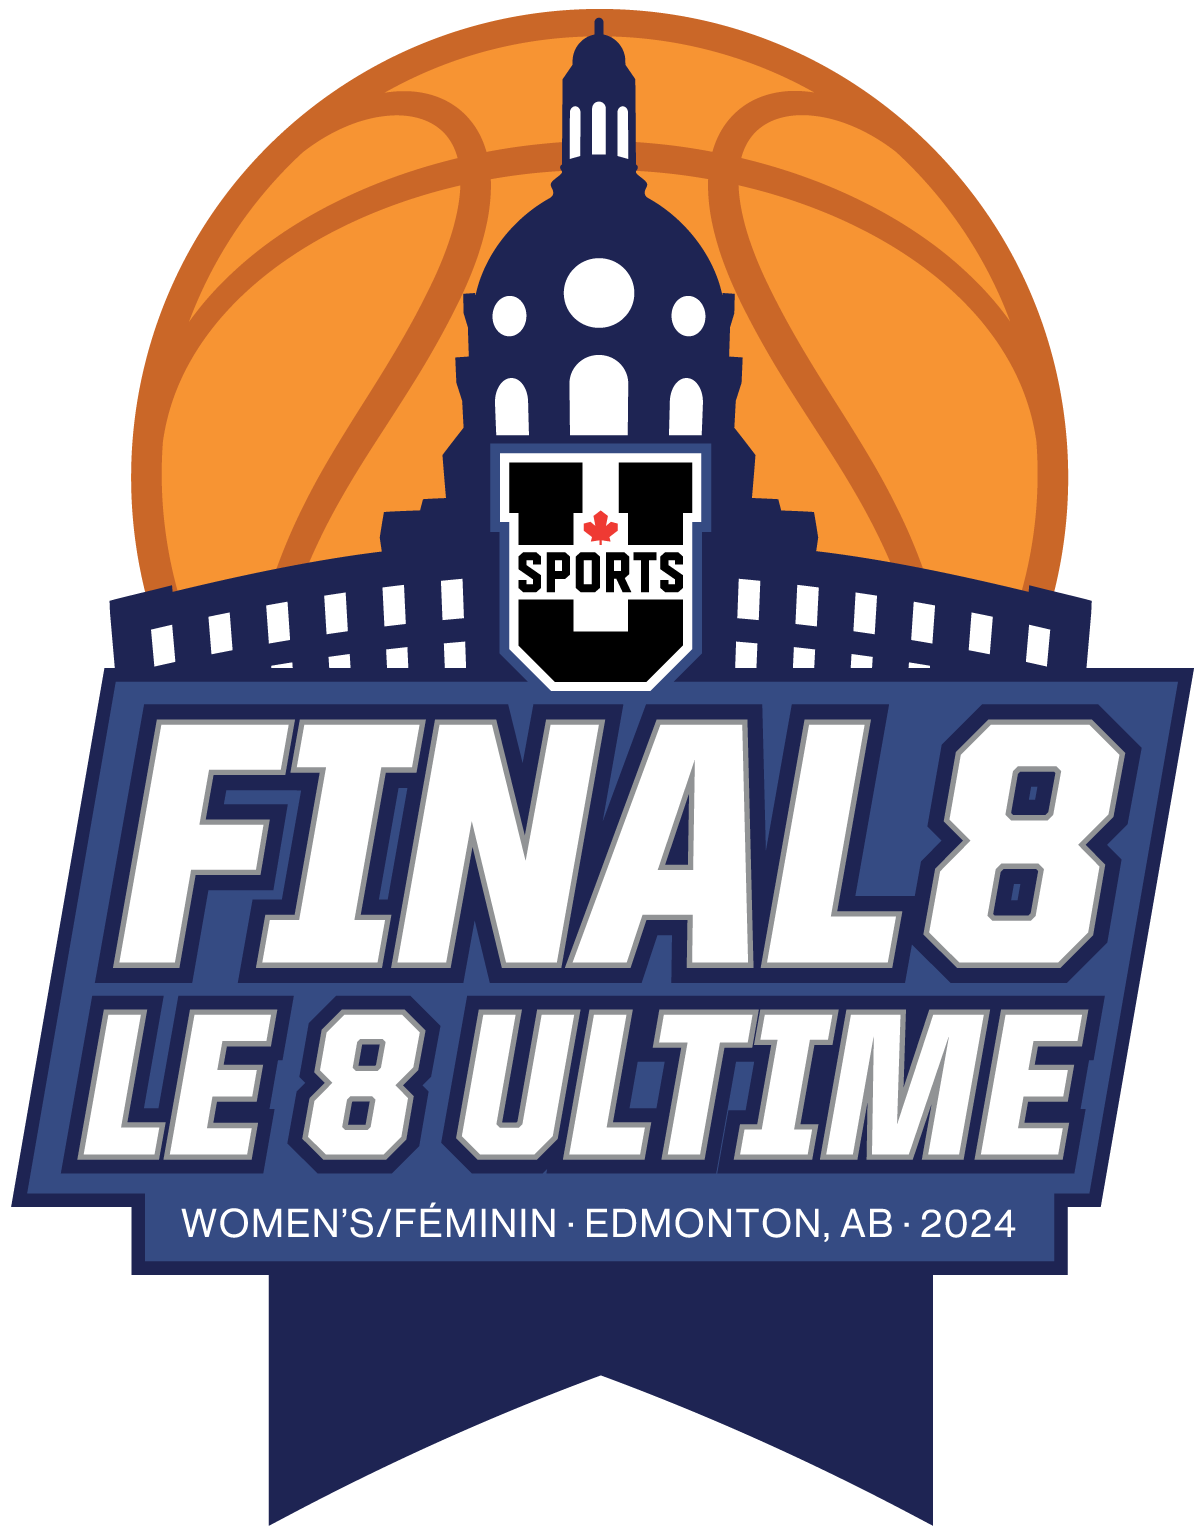 USports_Champs2324_Basketball_W_Primary_CMYK_BL_(1).png (130 KB)